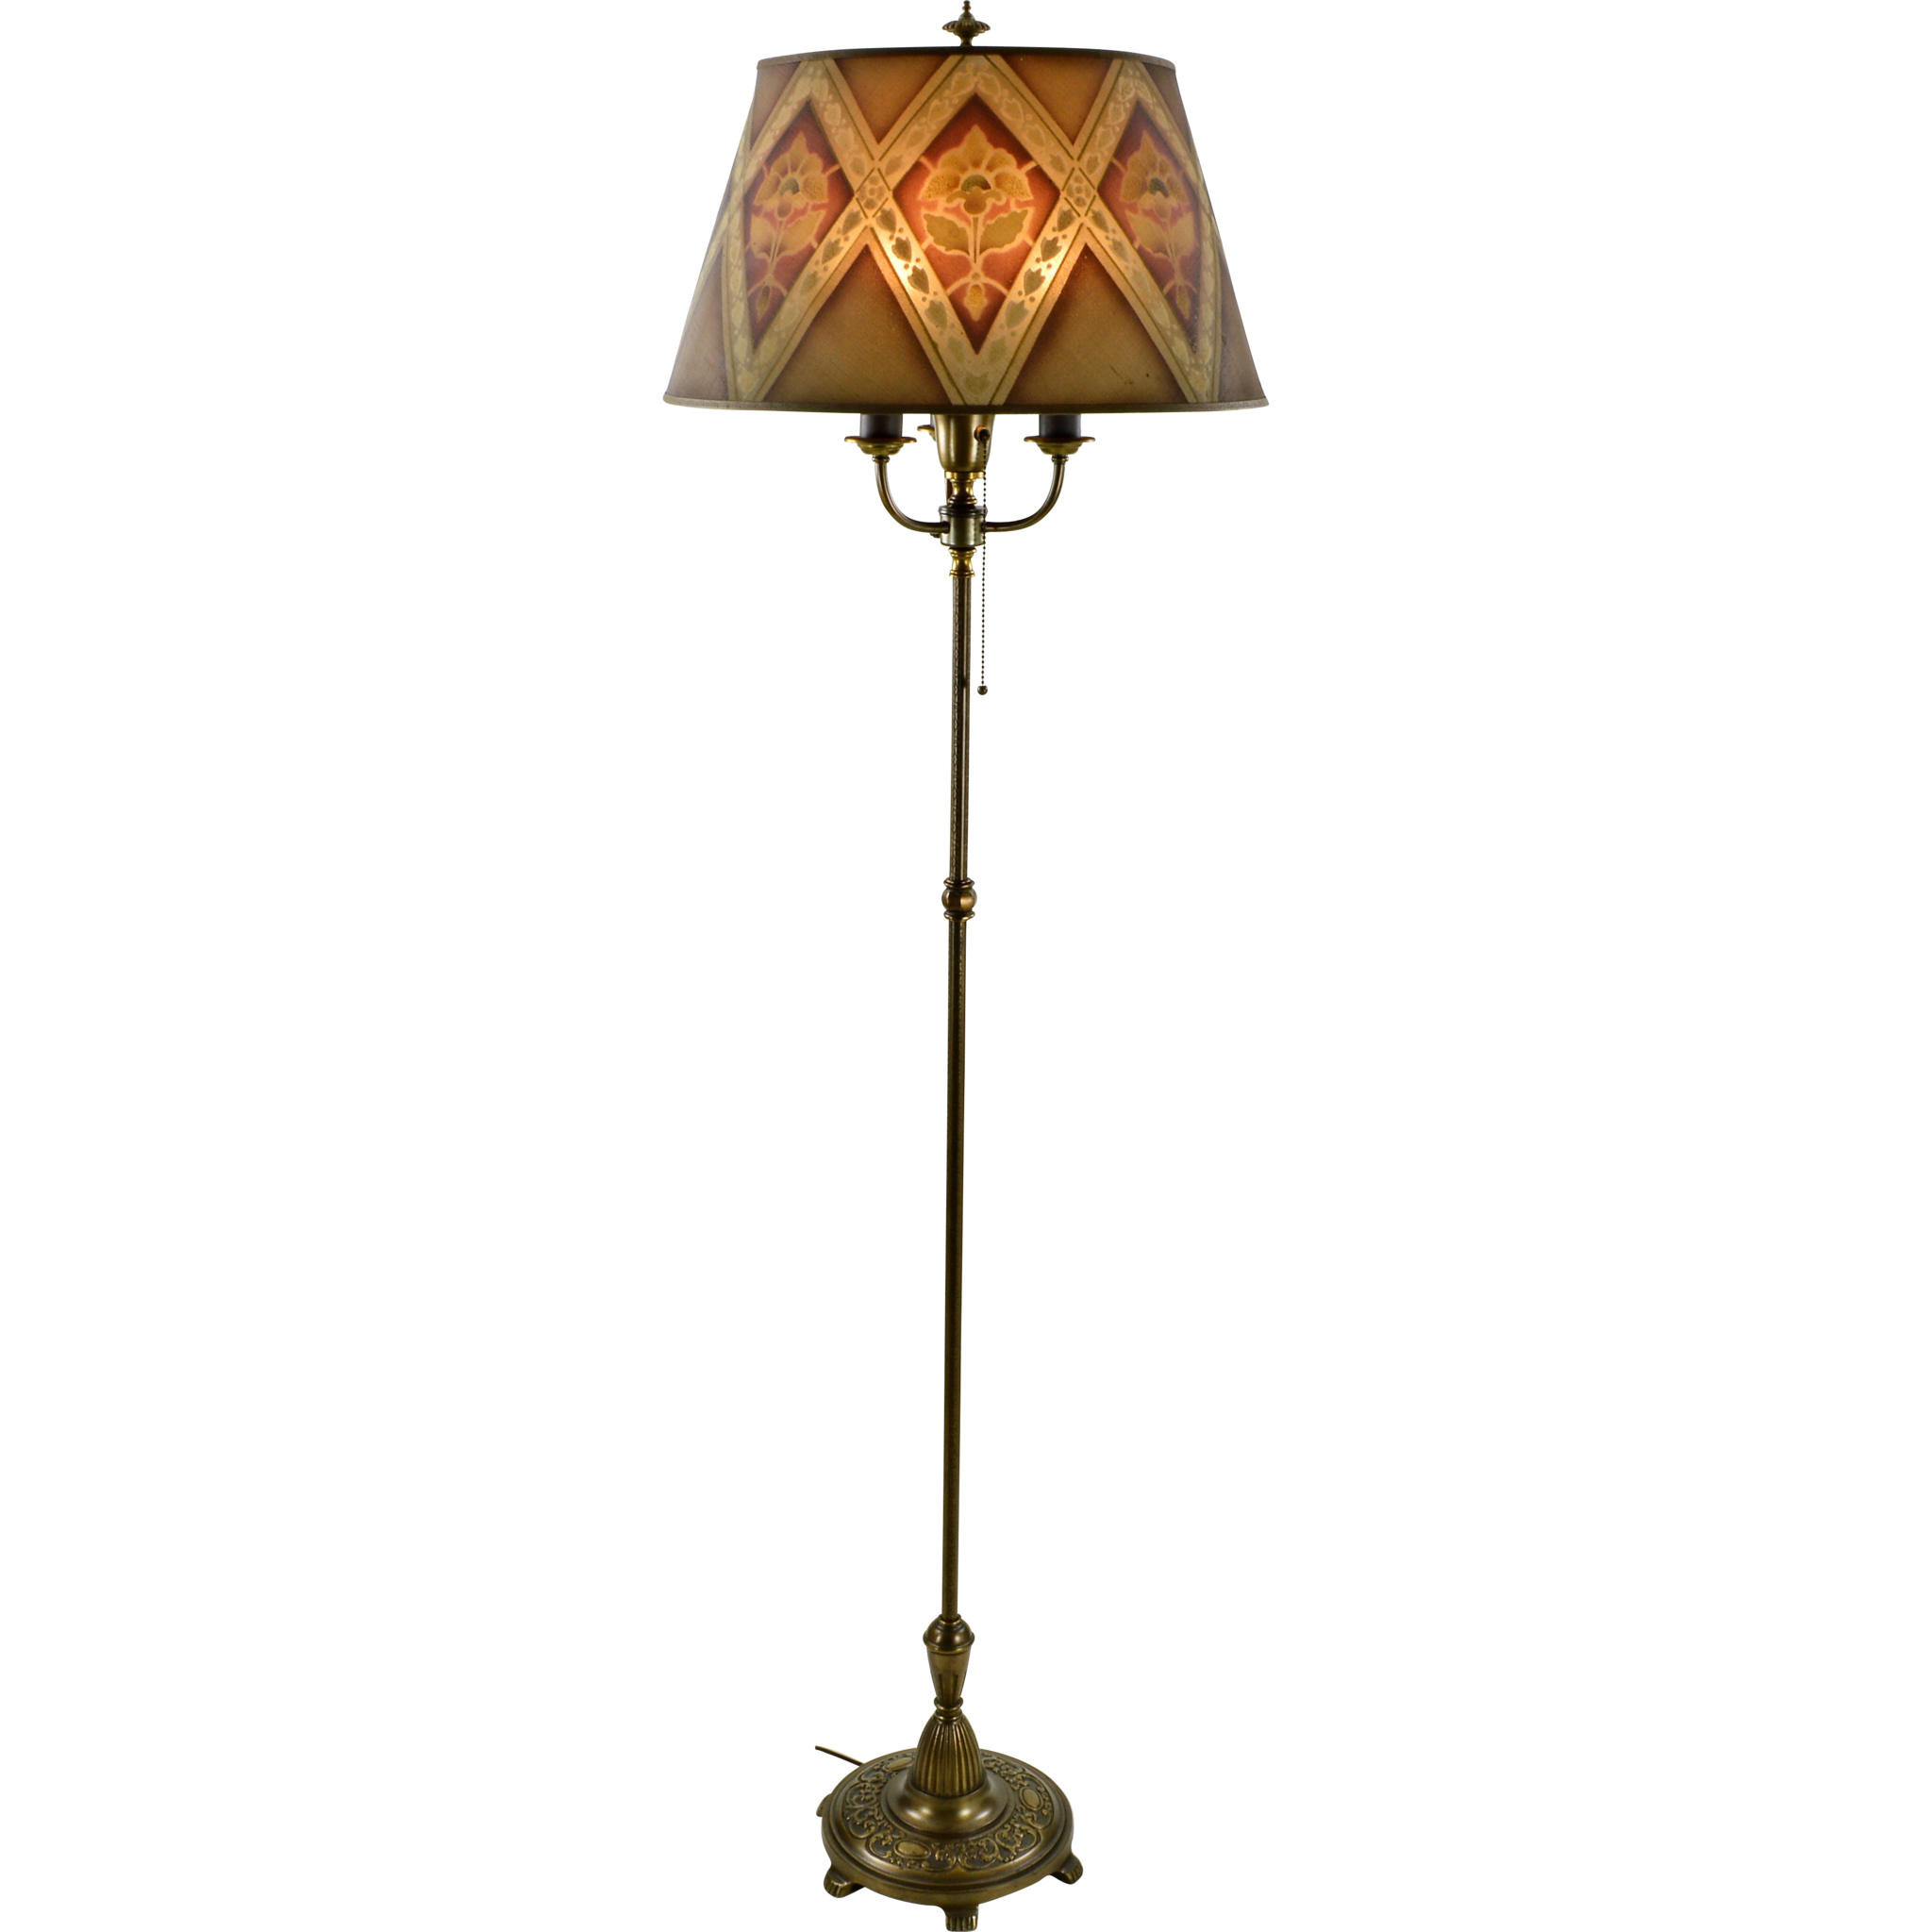 lamp facts about vintage floor lamps you should know #35094